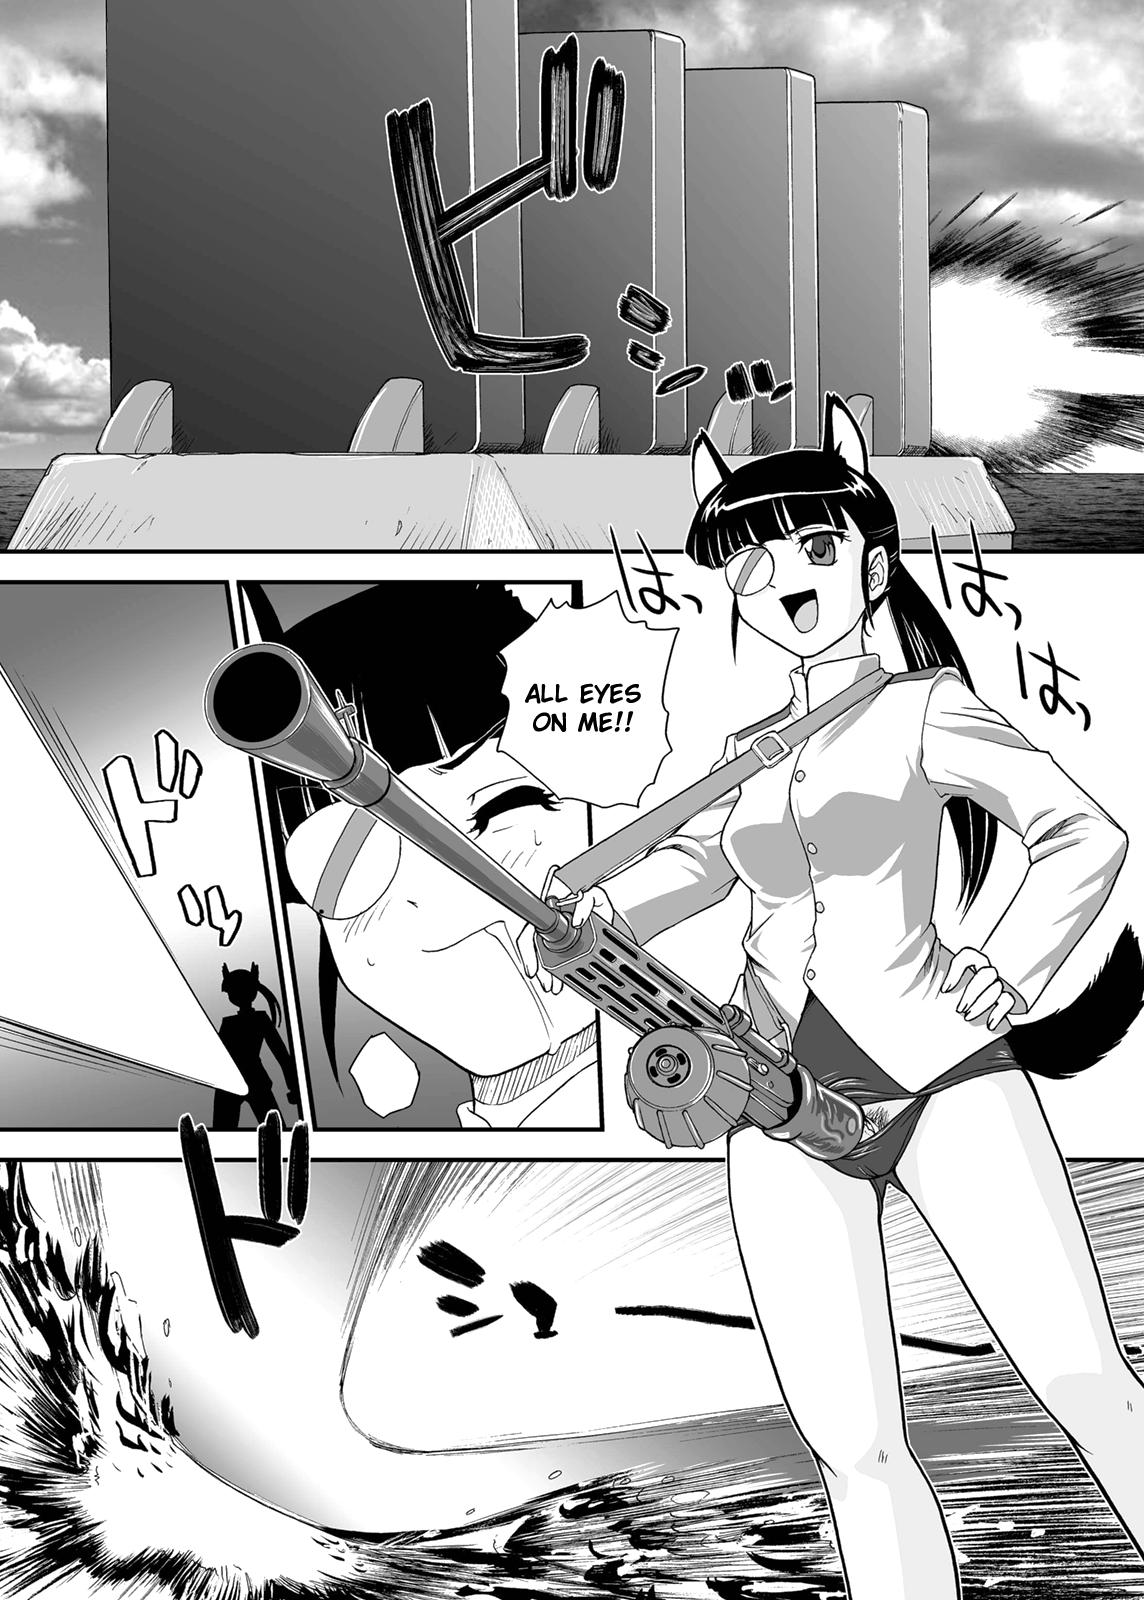 Ametuer Porn Chin ★ ja Naikara Hazukashiku Naimon!!! | It's Not A Real Dick, So There's Nothing to Be Embarrassed About!!! - Strike witches Hunk - Page 5